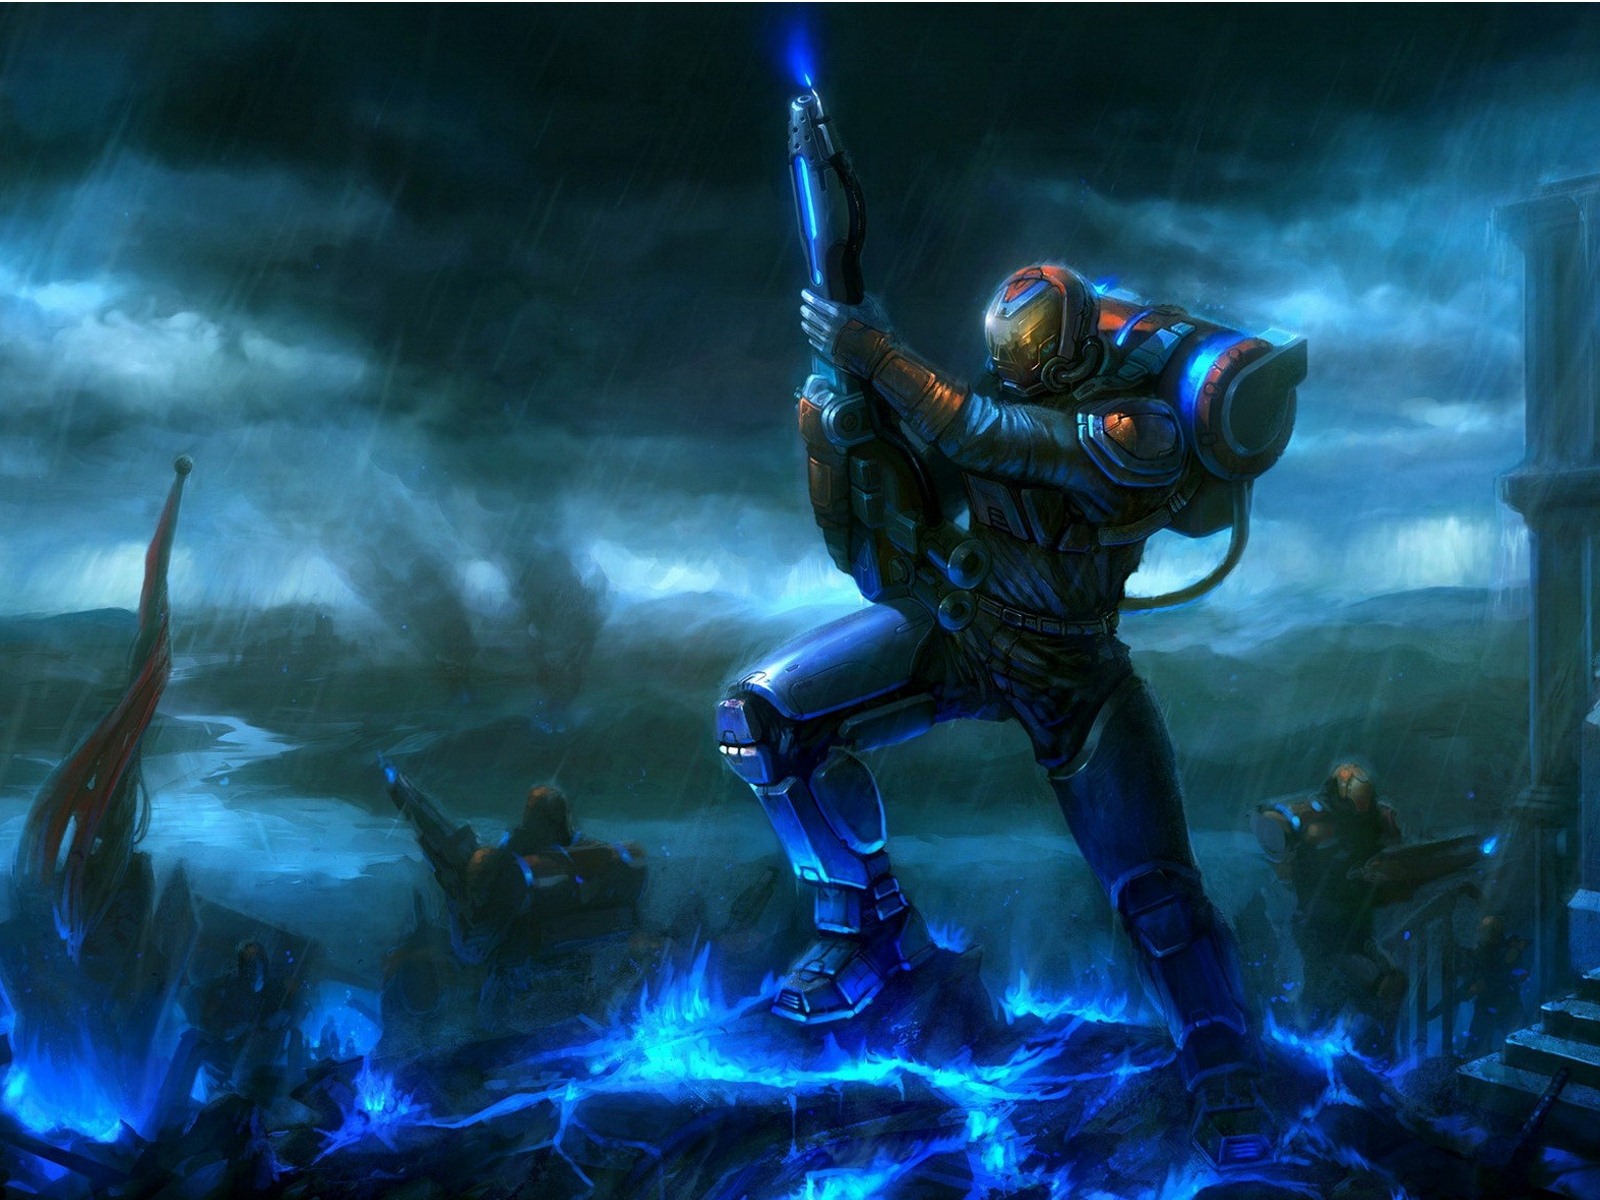 Halo game HD wallpapers #6 - 1600x1200